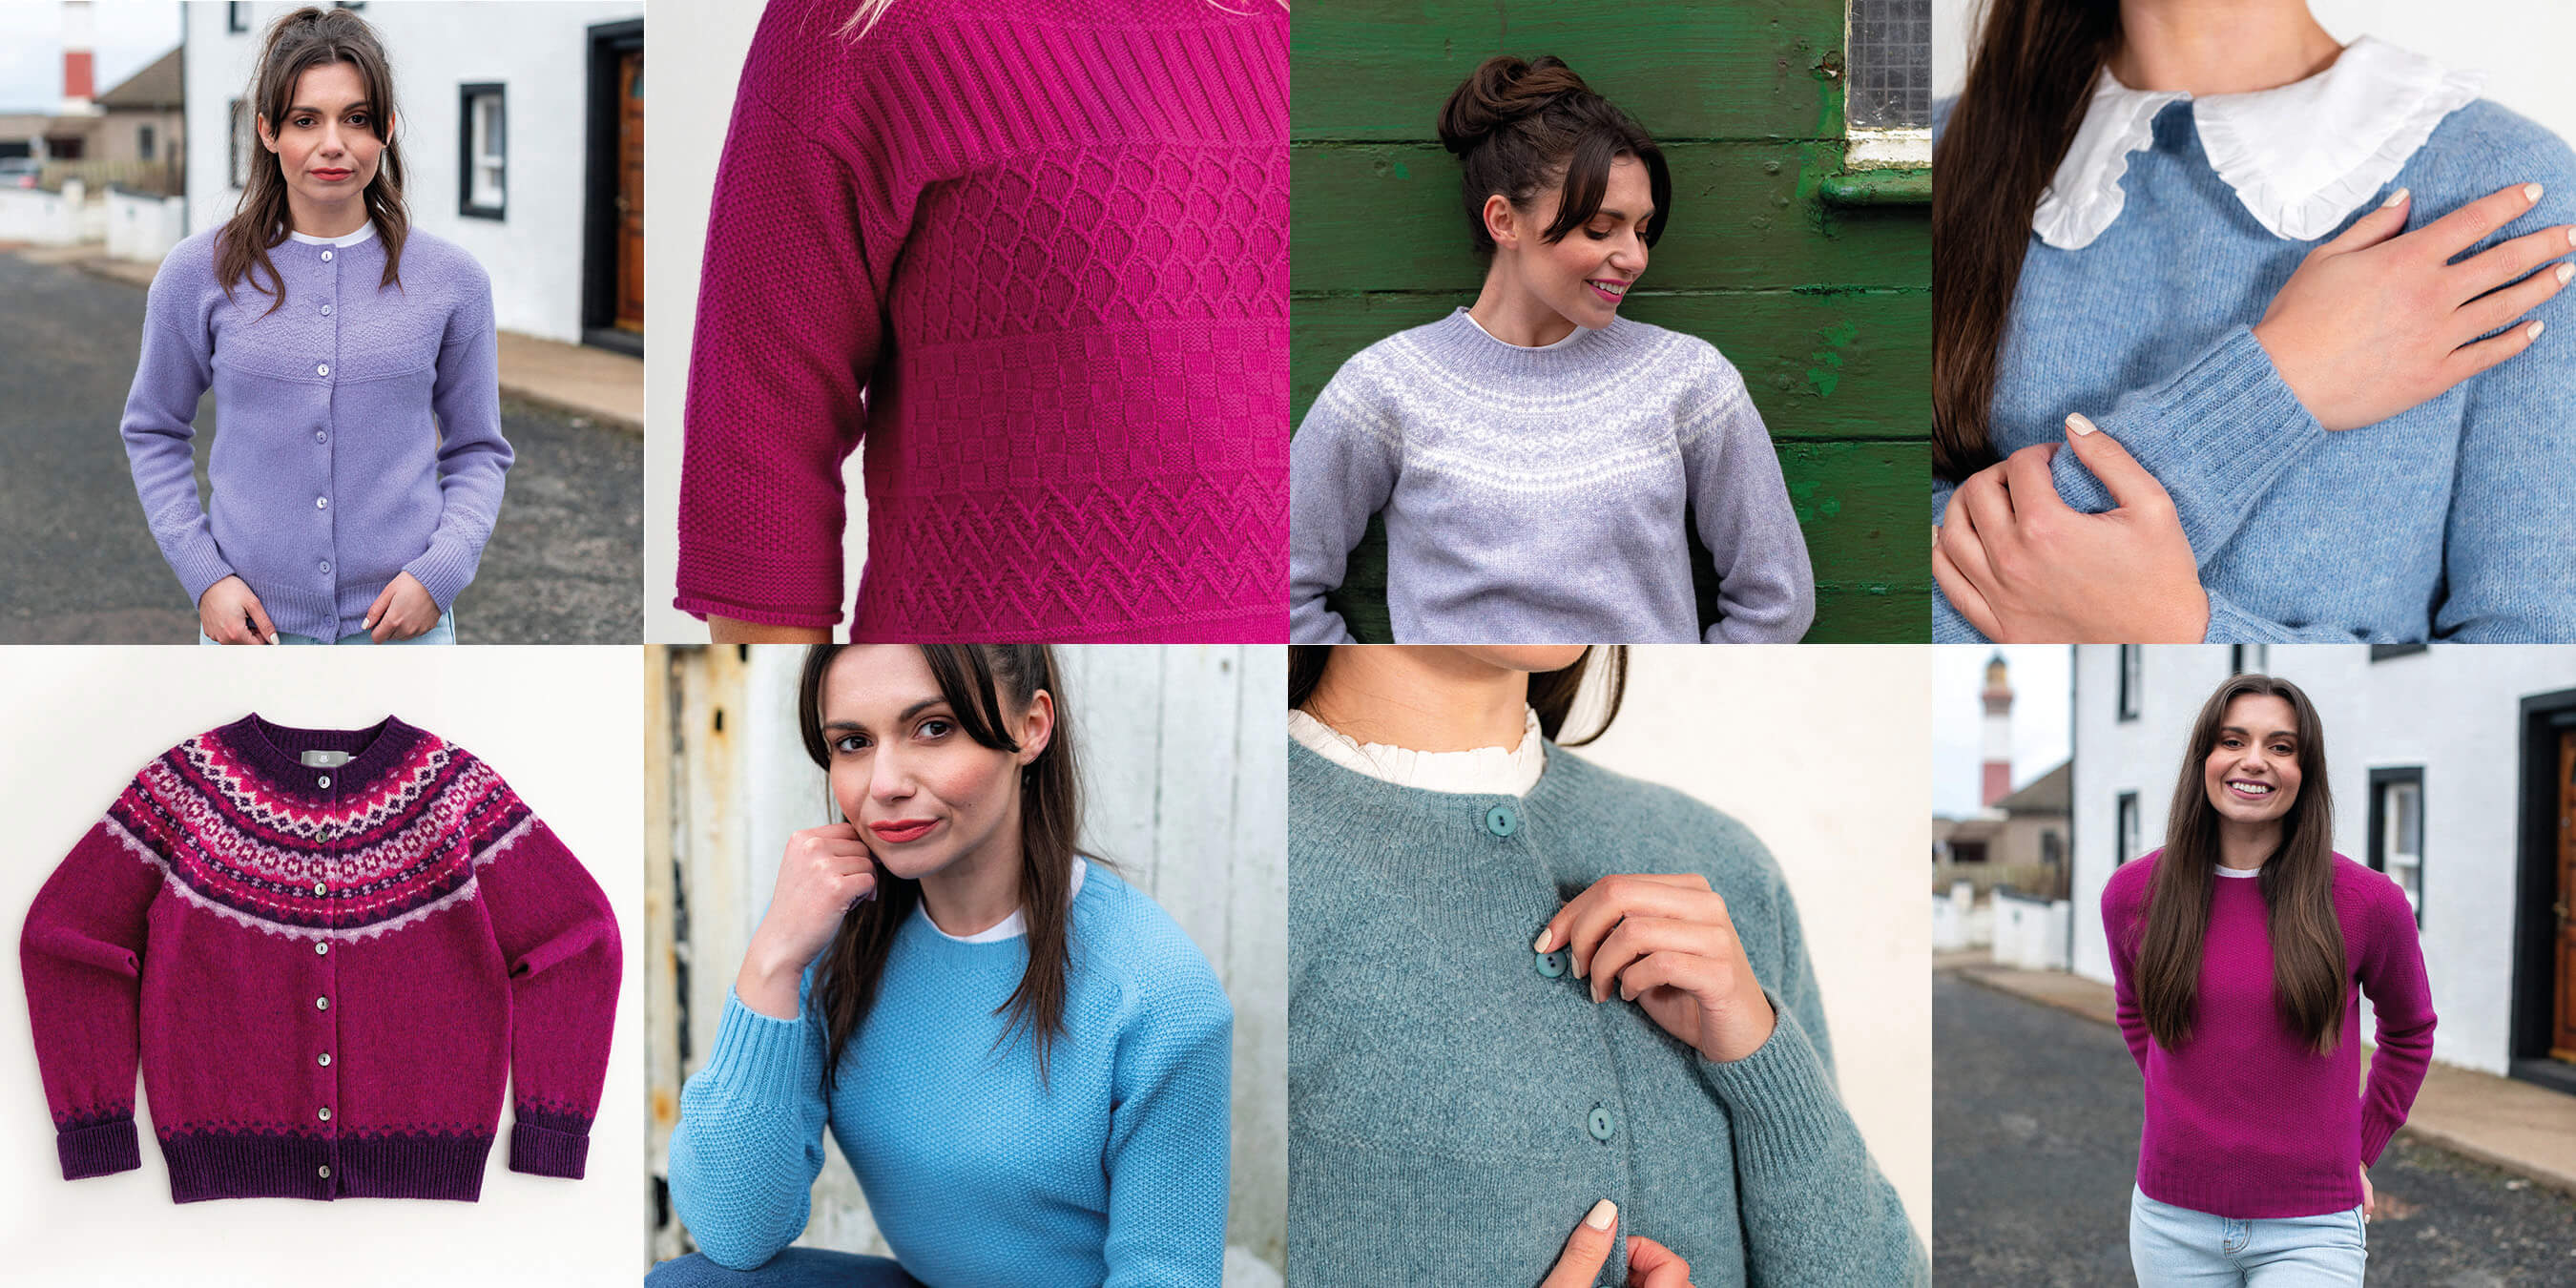 Womens sustainable knitwear - joyful colours for Spring